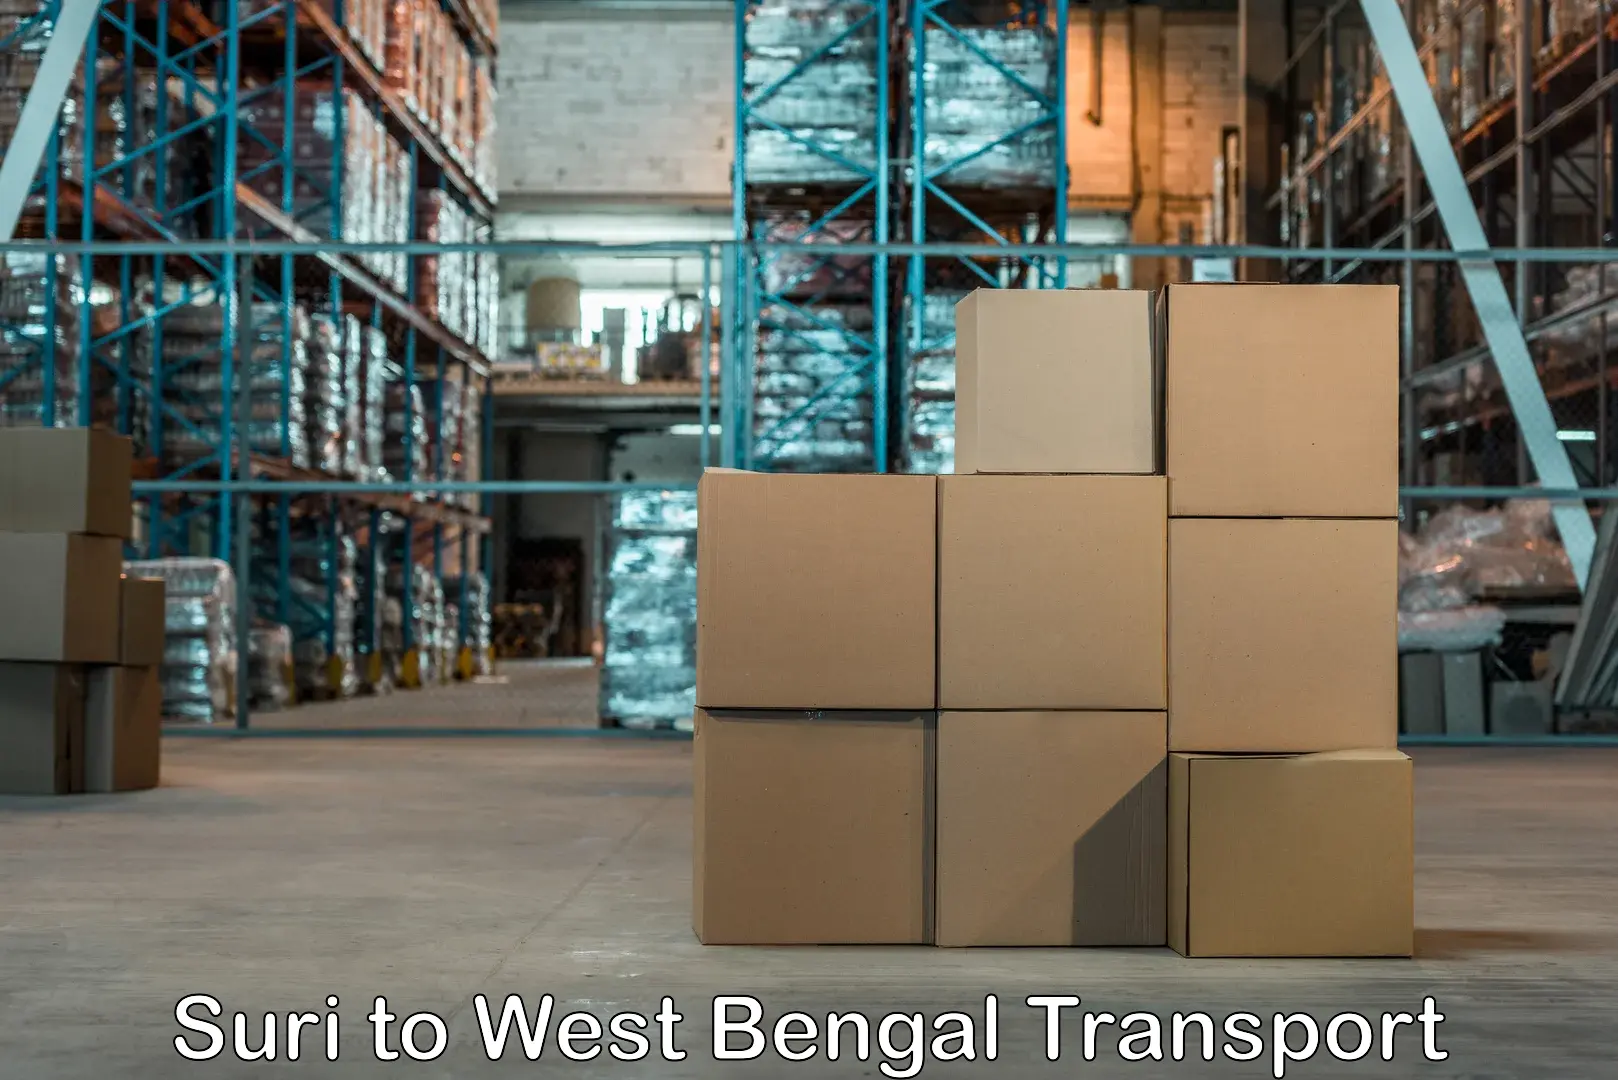 Truck transport companies in India Suri to South 24 Parganas